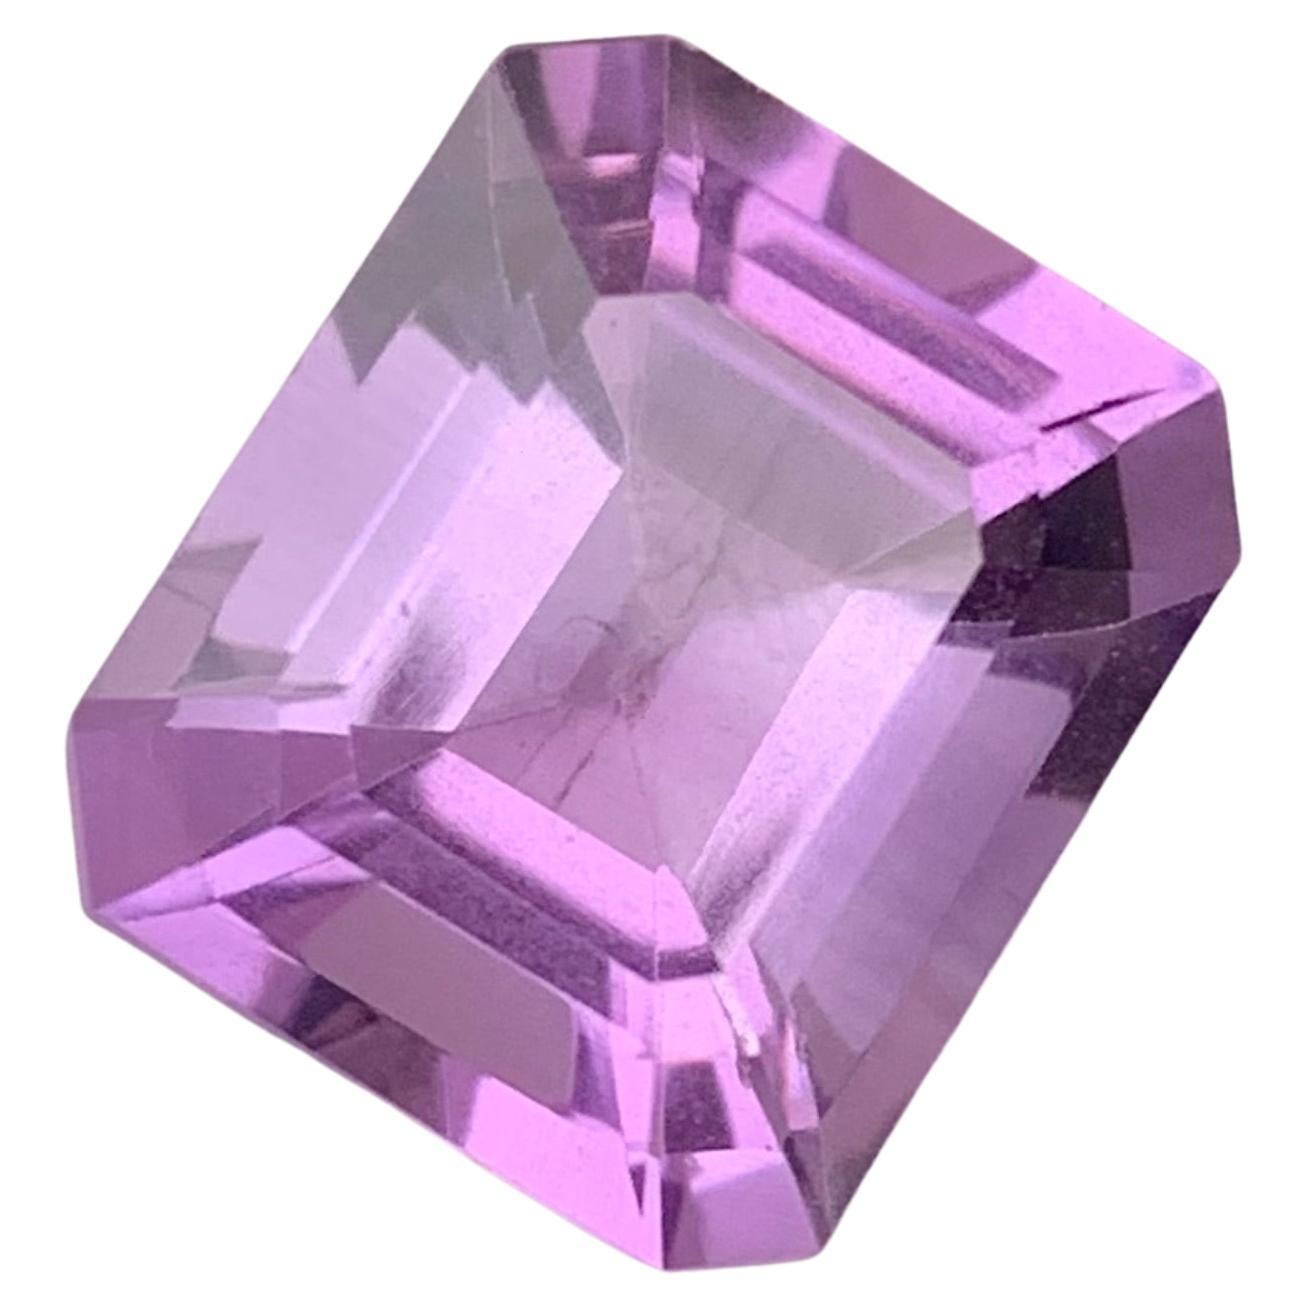 8.10 Carat Natural Loose Purple Amethyst Gemstone for Jewelry Making